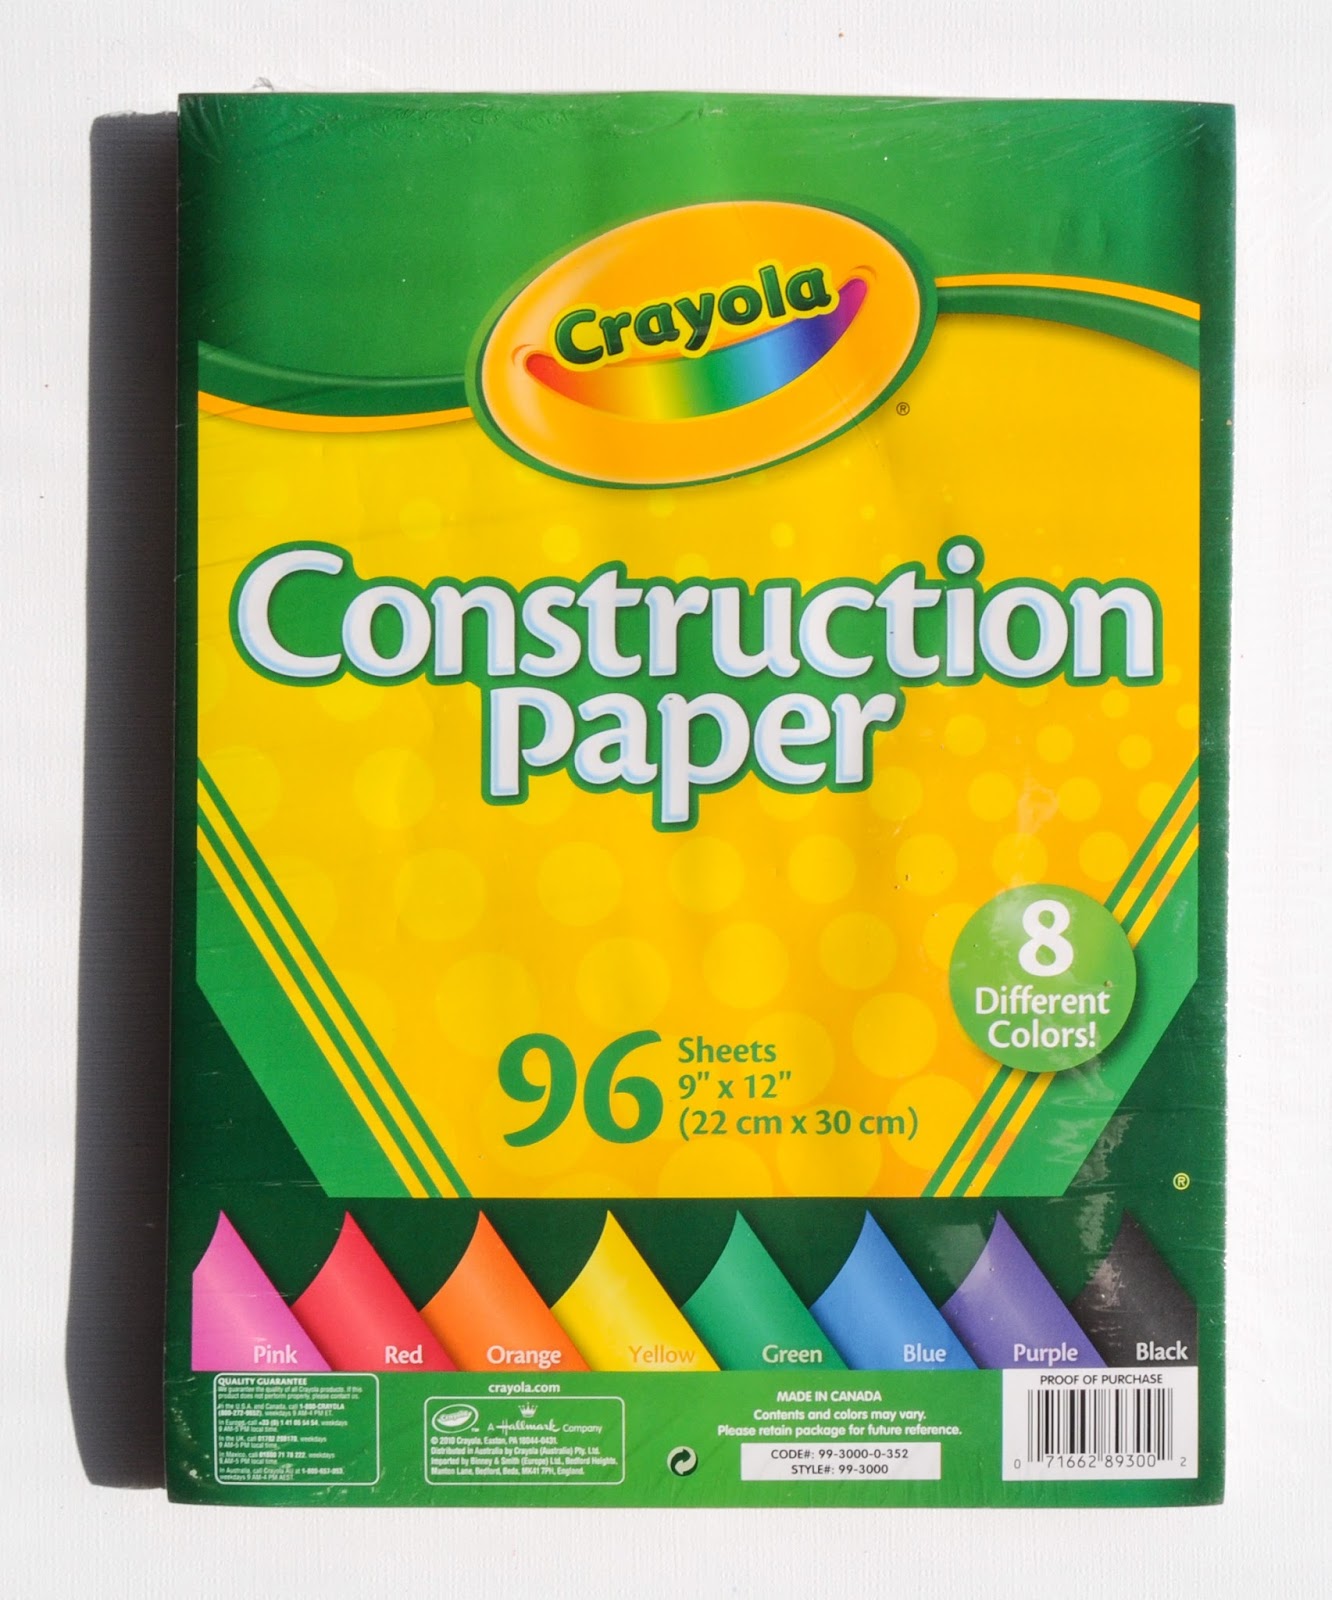 Crayola Construction Paper: What's Inside the Package